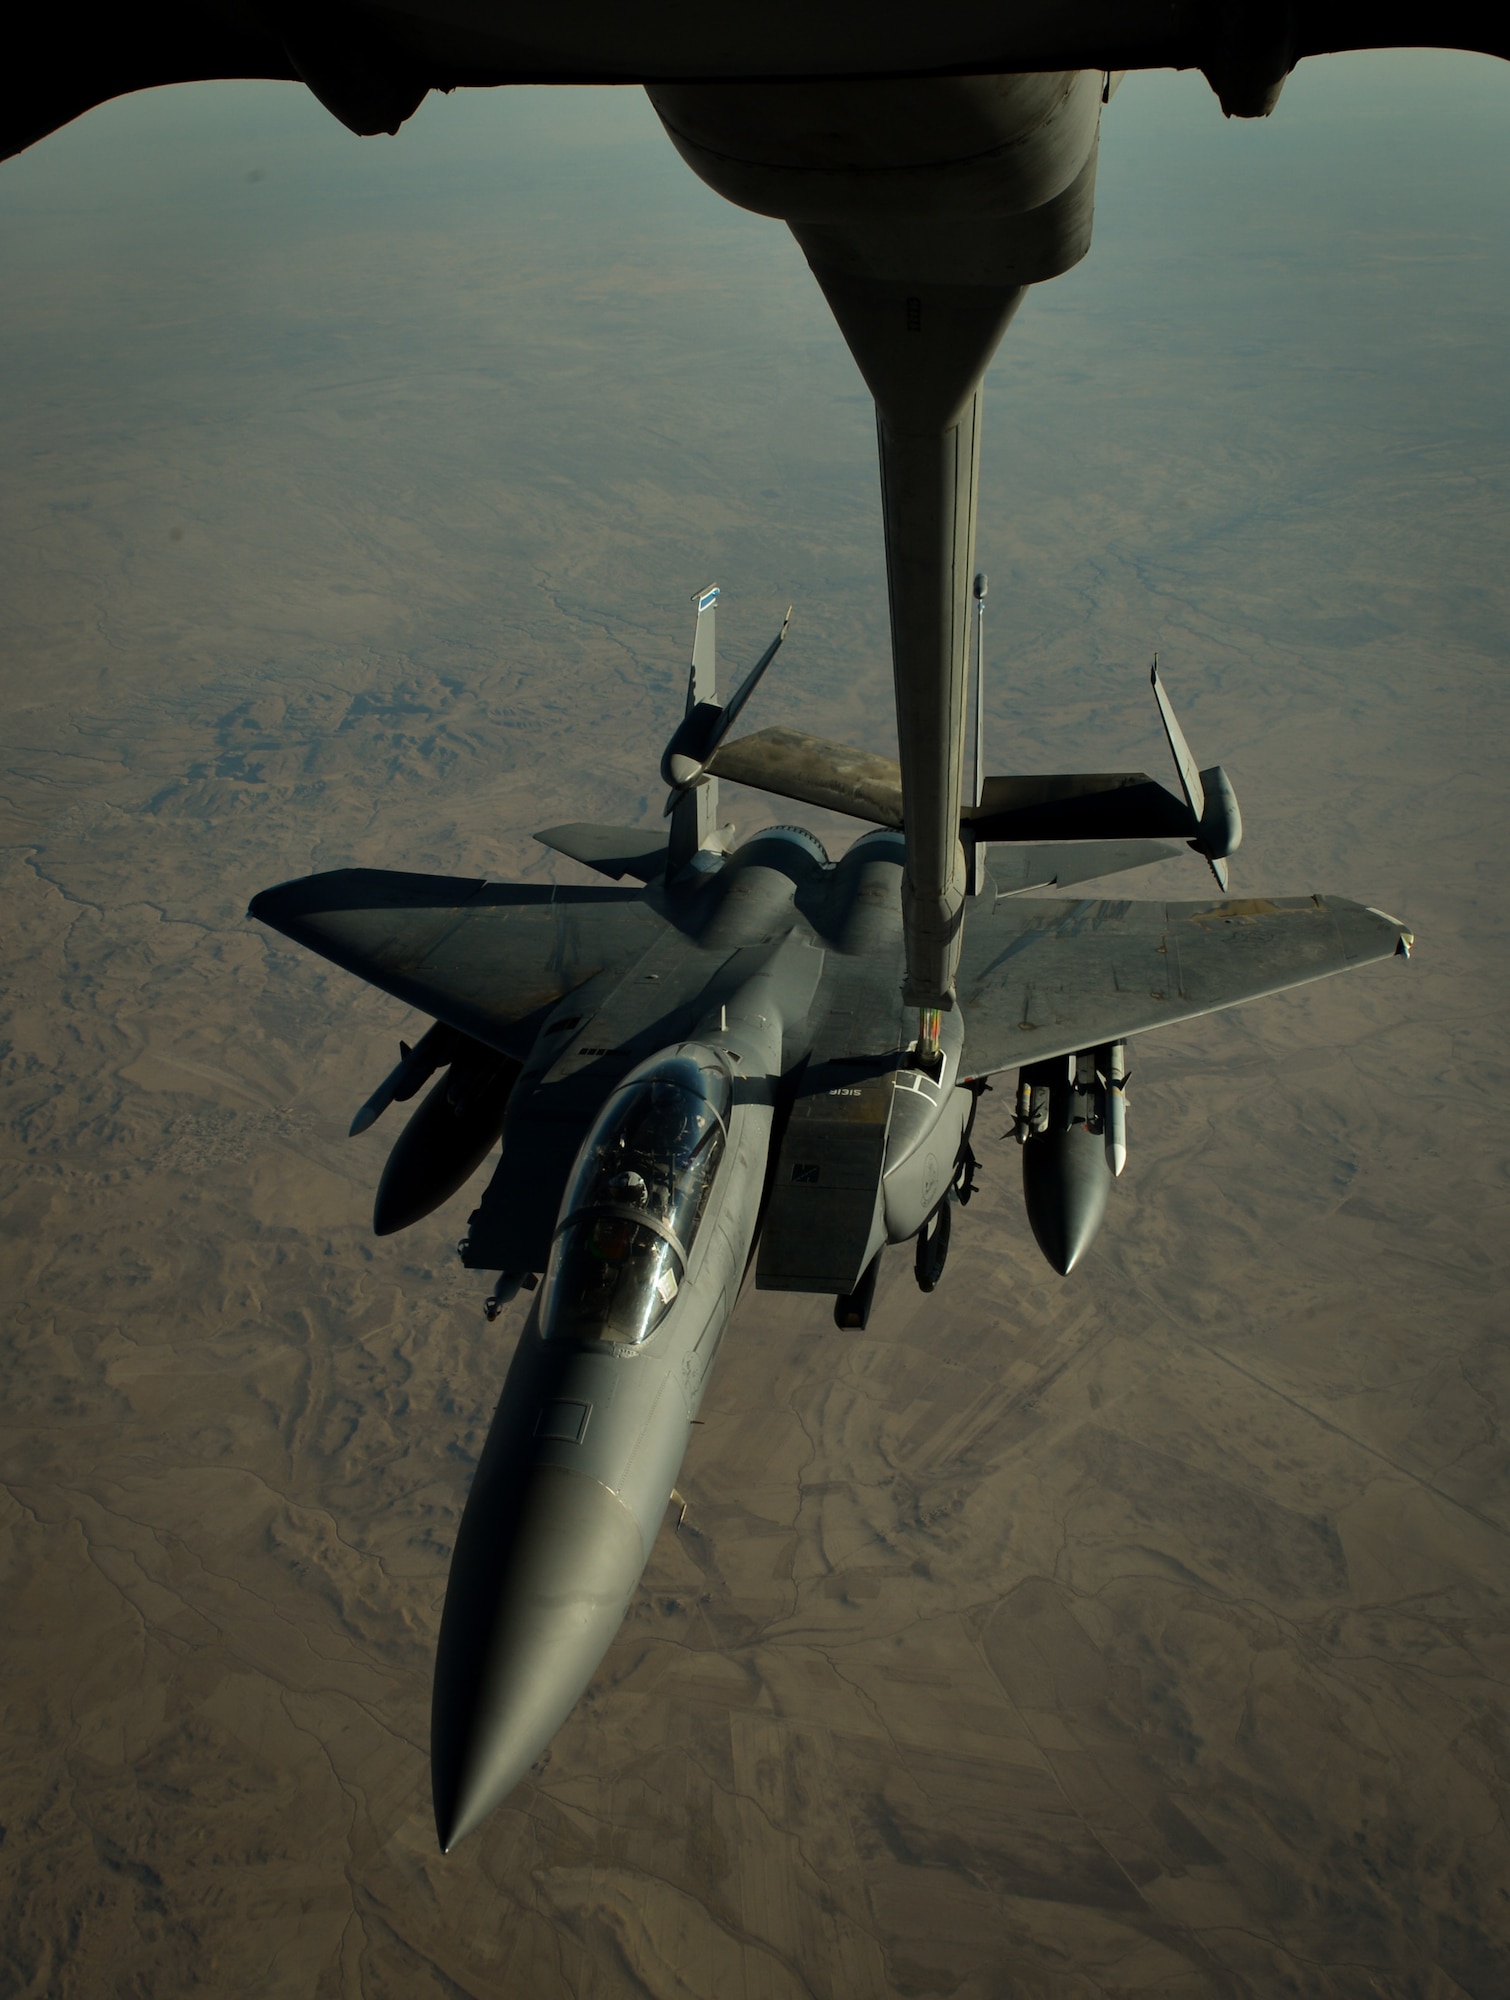 A U.S. Air Force F-15E Strike Eagle receives fuel from a 908th Expeditionary Air Refueling Squadron KC-10 Extender during a flight in support of Operation Inherent Resolve June 2, 2017. The F-15E Strike Eagle is a dual-role fighter designed to perform air-to-air and air-to-ground missions. An array of avionics and electronics systems gives the F-15E the capability to fight at low altitude, day or night, and in all weather. (U.S. Air Force photo by Staff Sgt. Michael Battles)